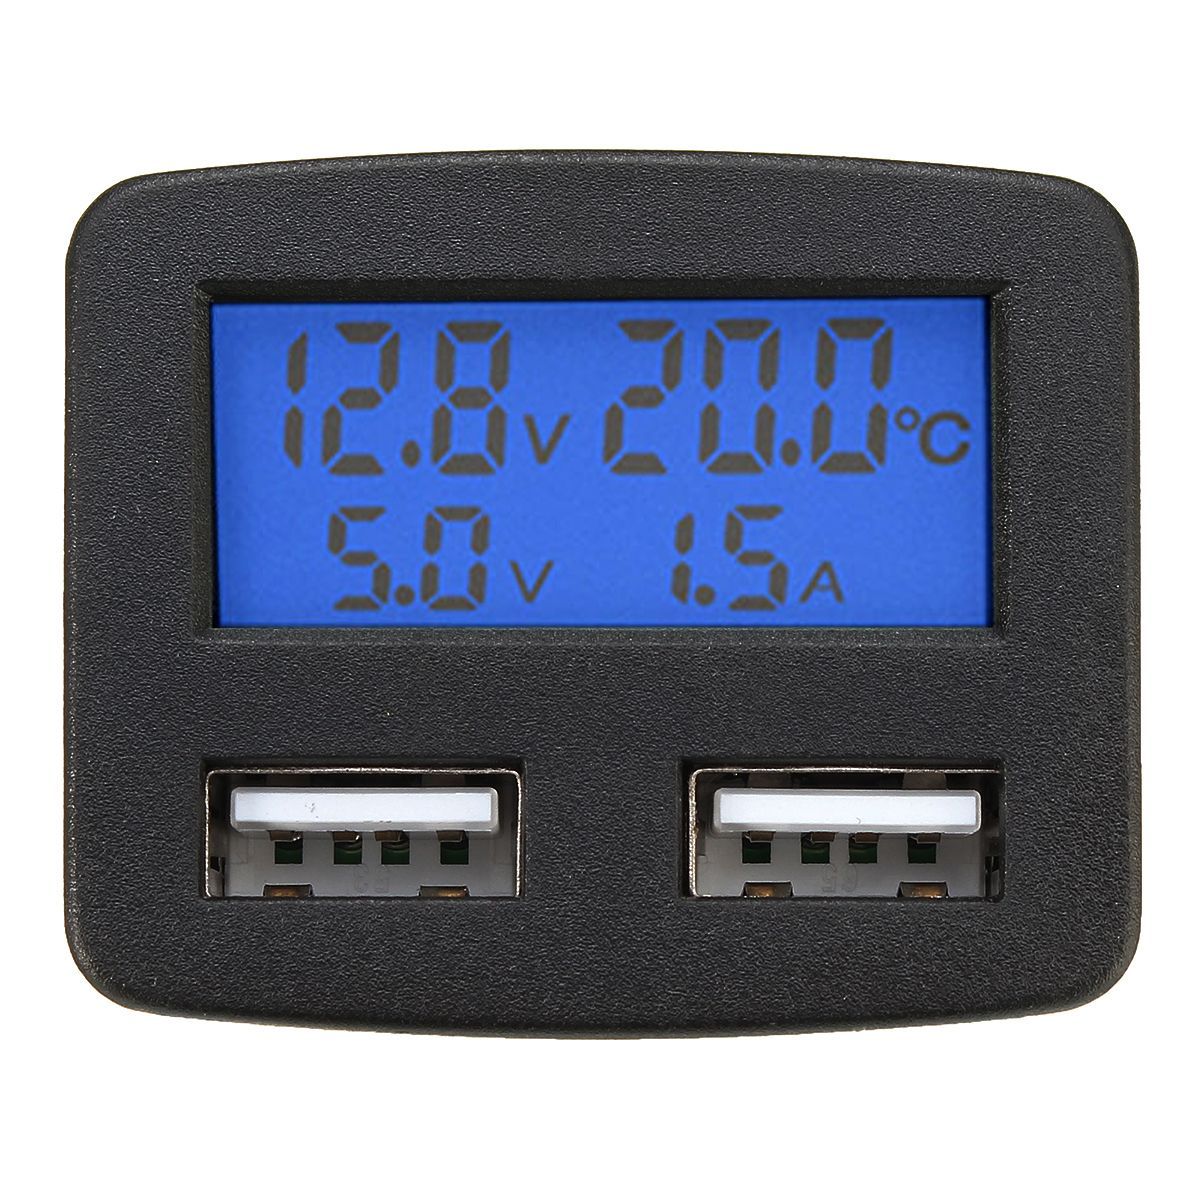 12V-24V-Universal-Dual-USB-Interface-Car-Charger-With-Voltmeter-Ammeter-Thermometer-LCD-Display-1291387